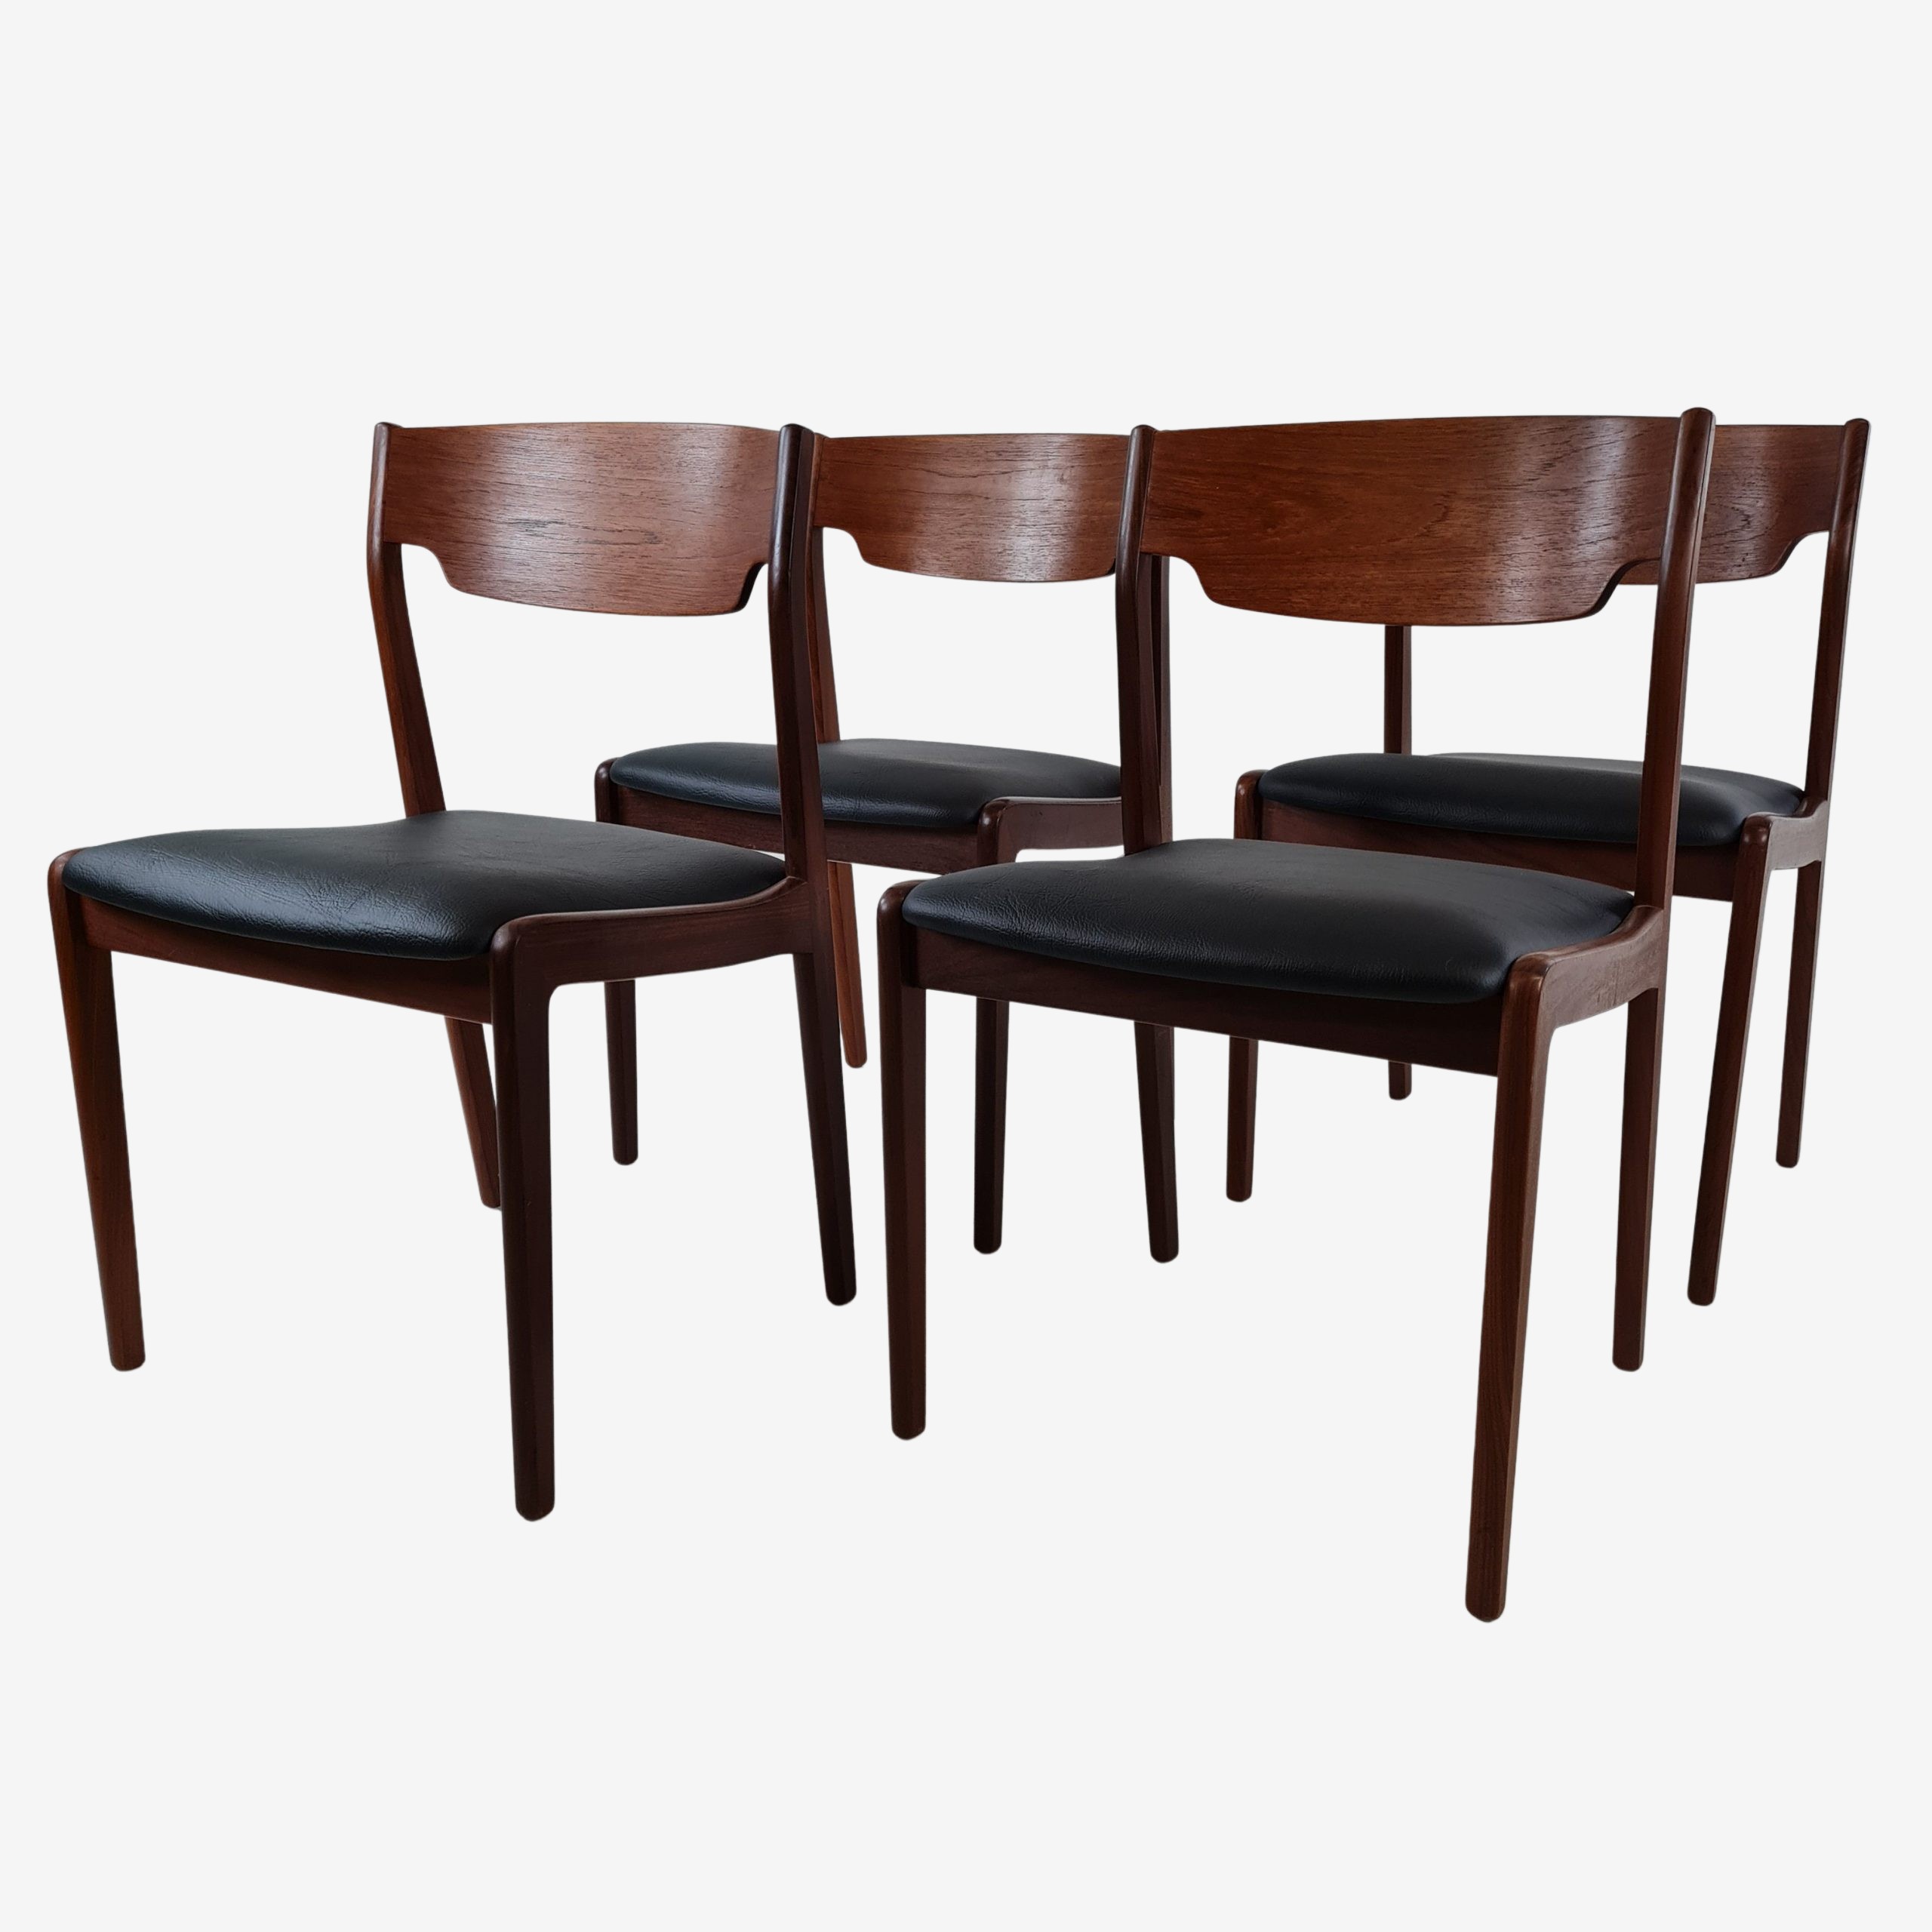 Dining table chairs | Teak & artificial leather